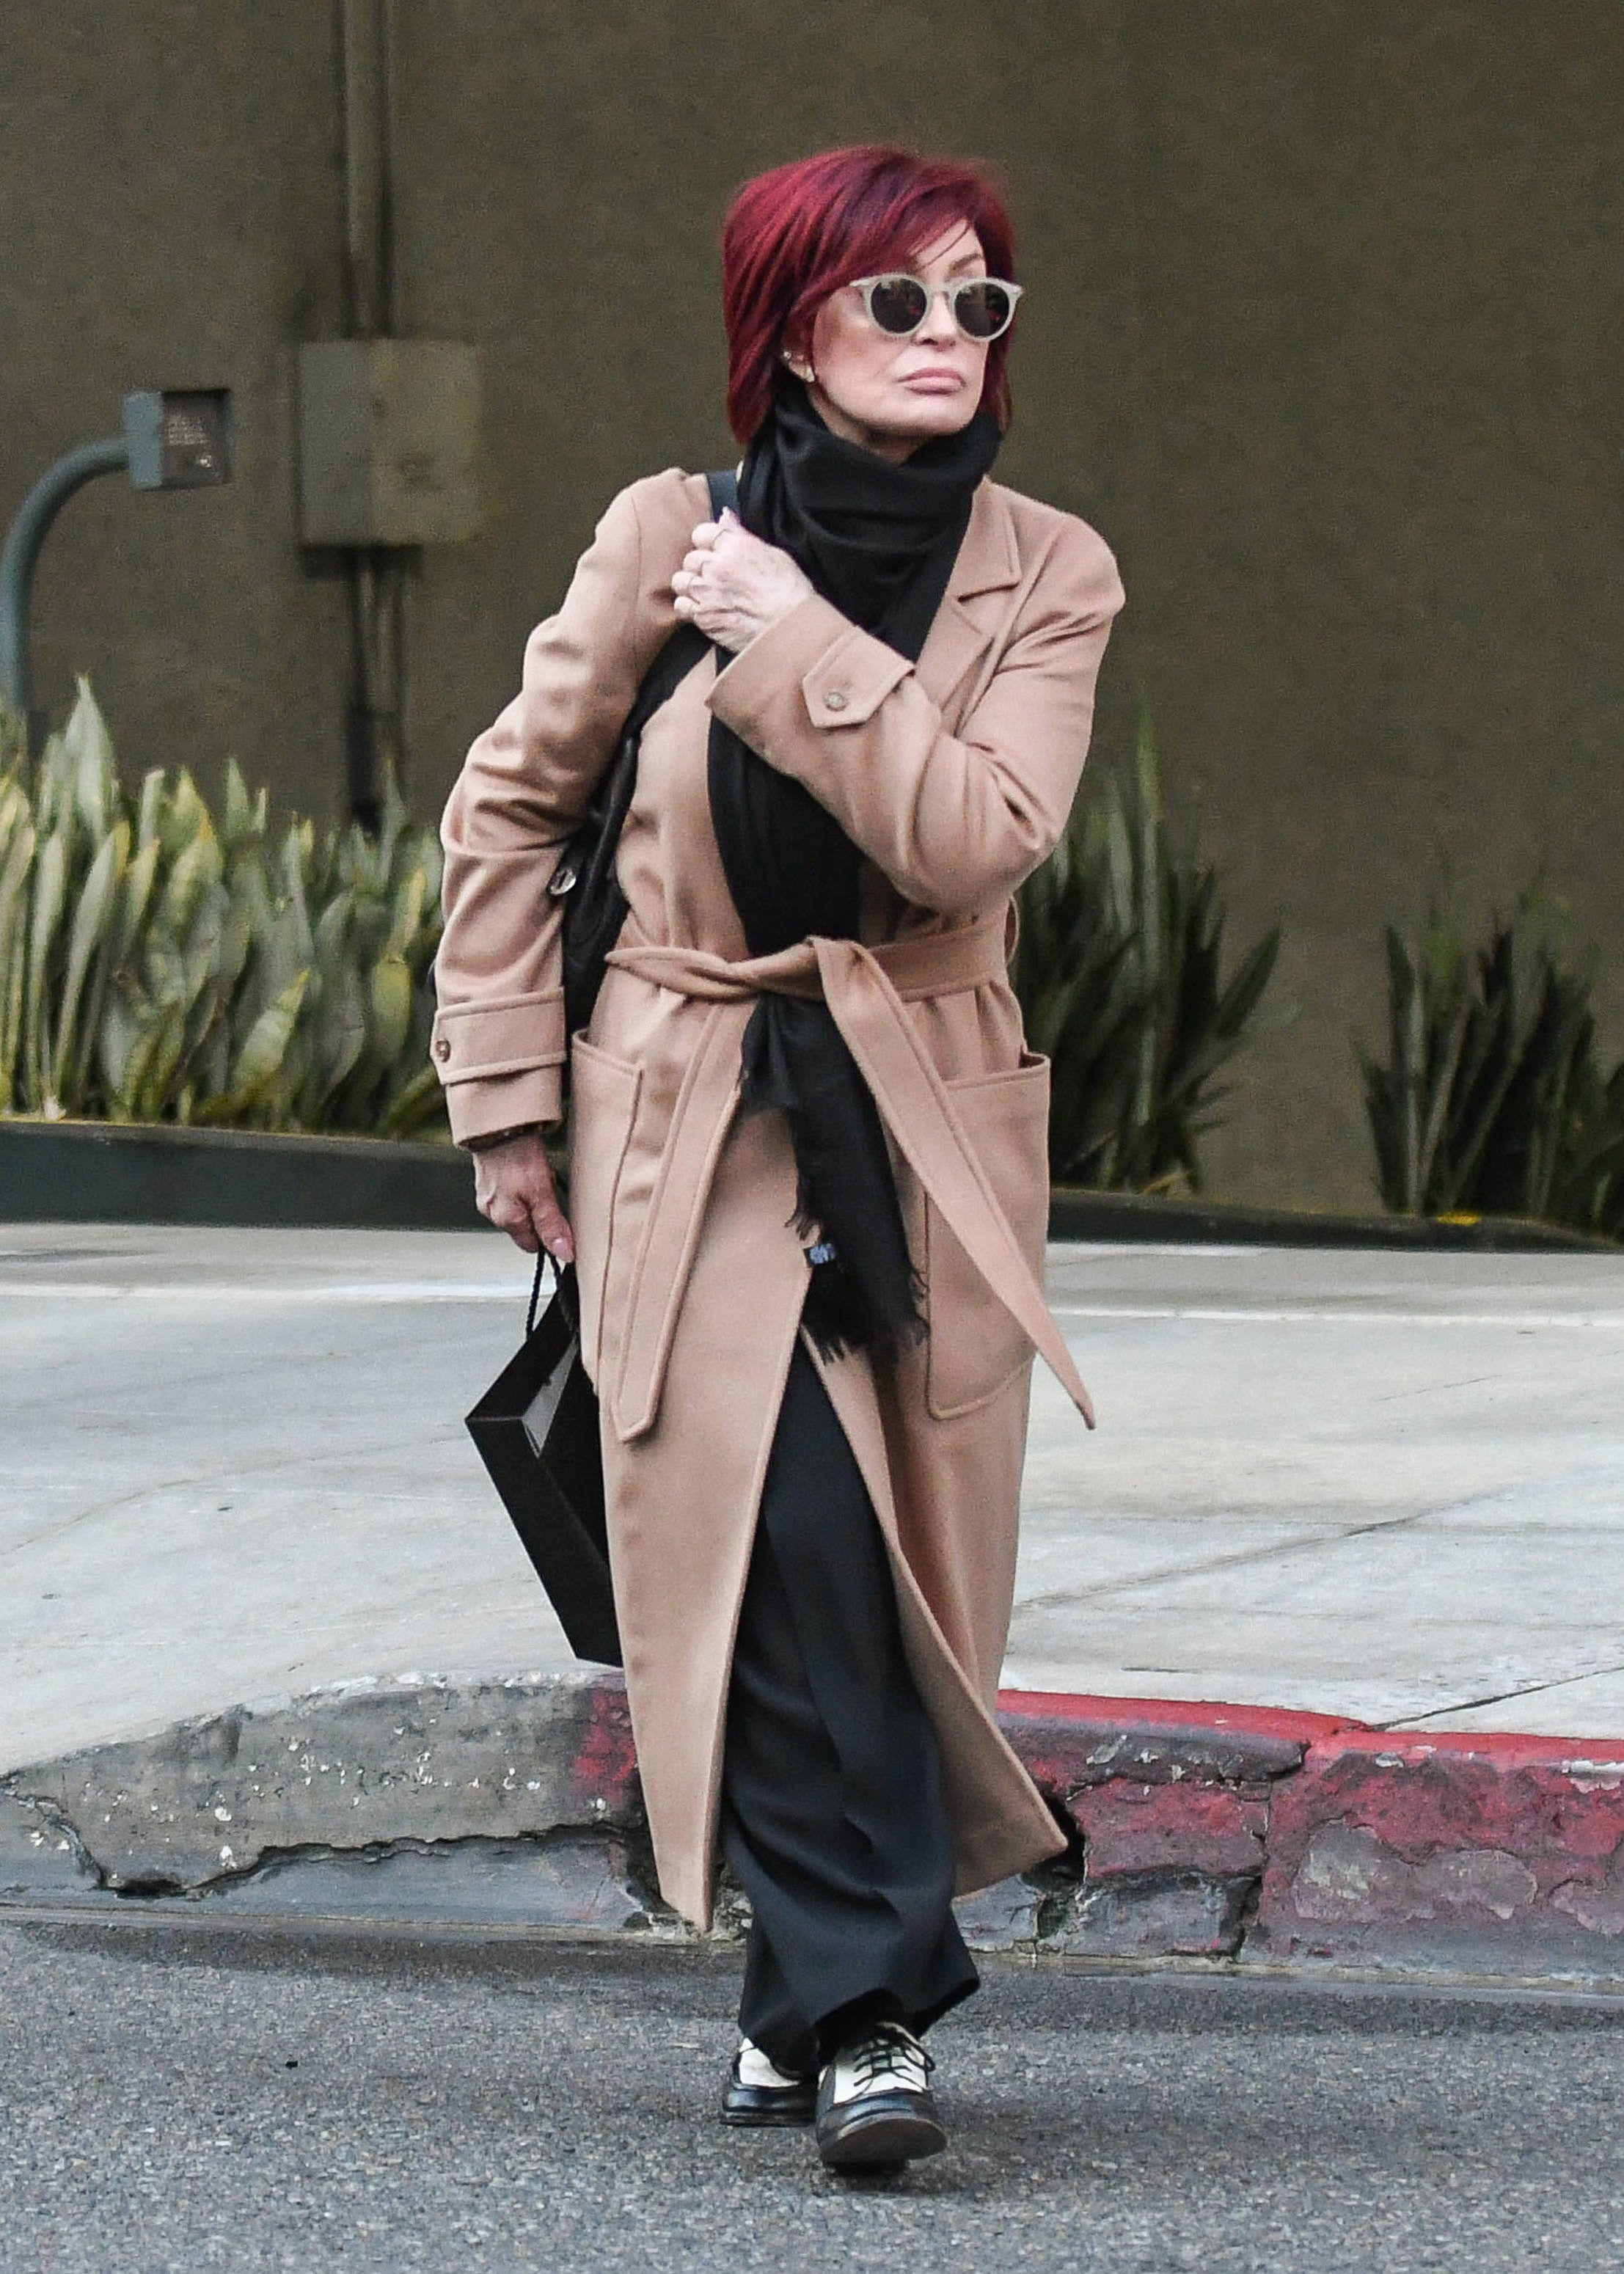 Sharon Osbourne is seen in Los Angeles, California on January 8, 2020 | Source: Getty Images